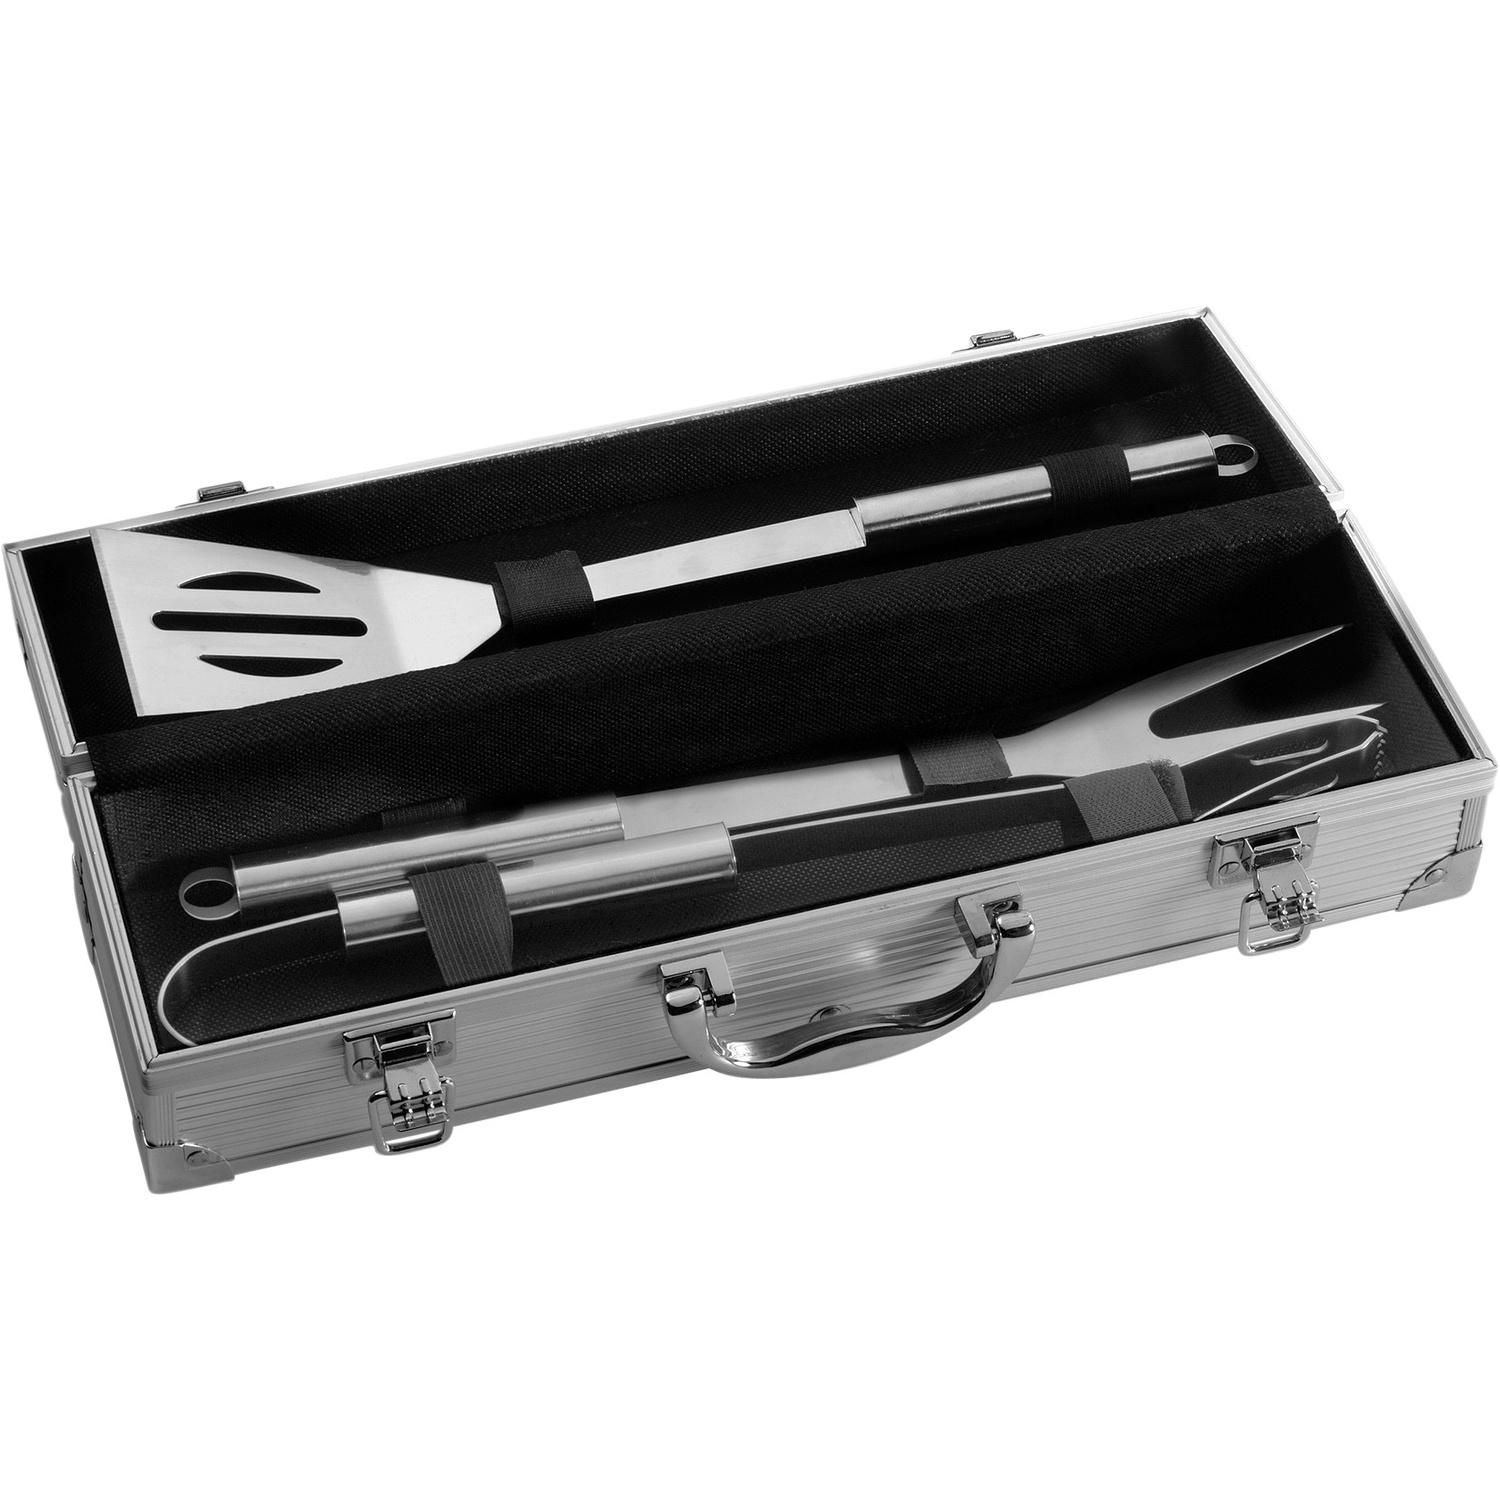 002637 032999999 3d135 gbo pro01 fal - Barbecue set